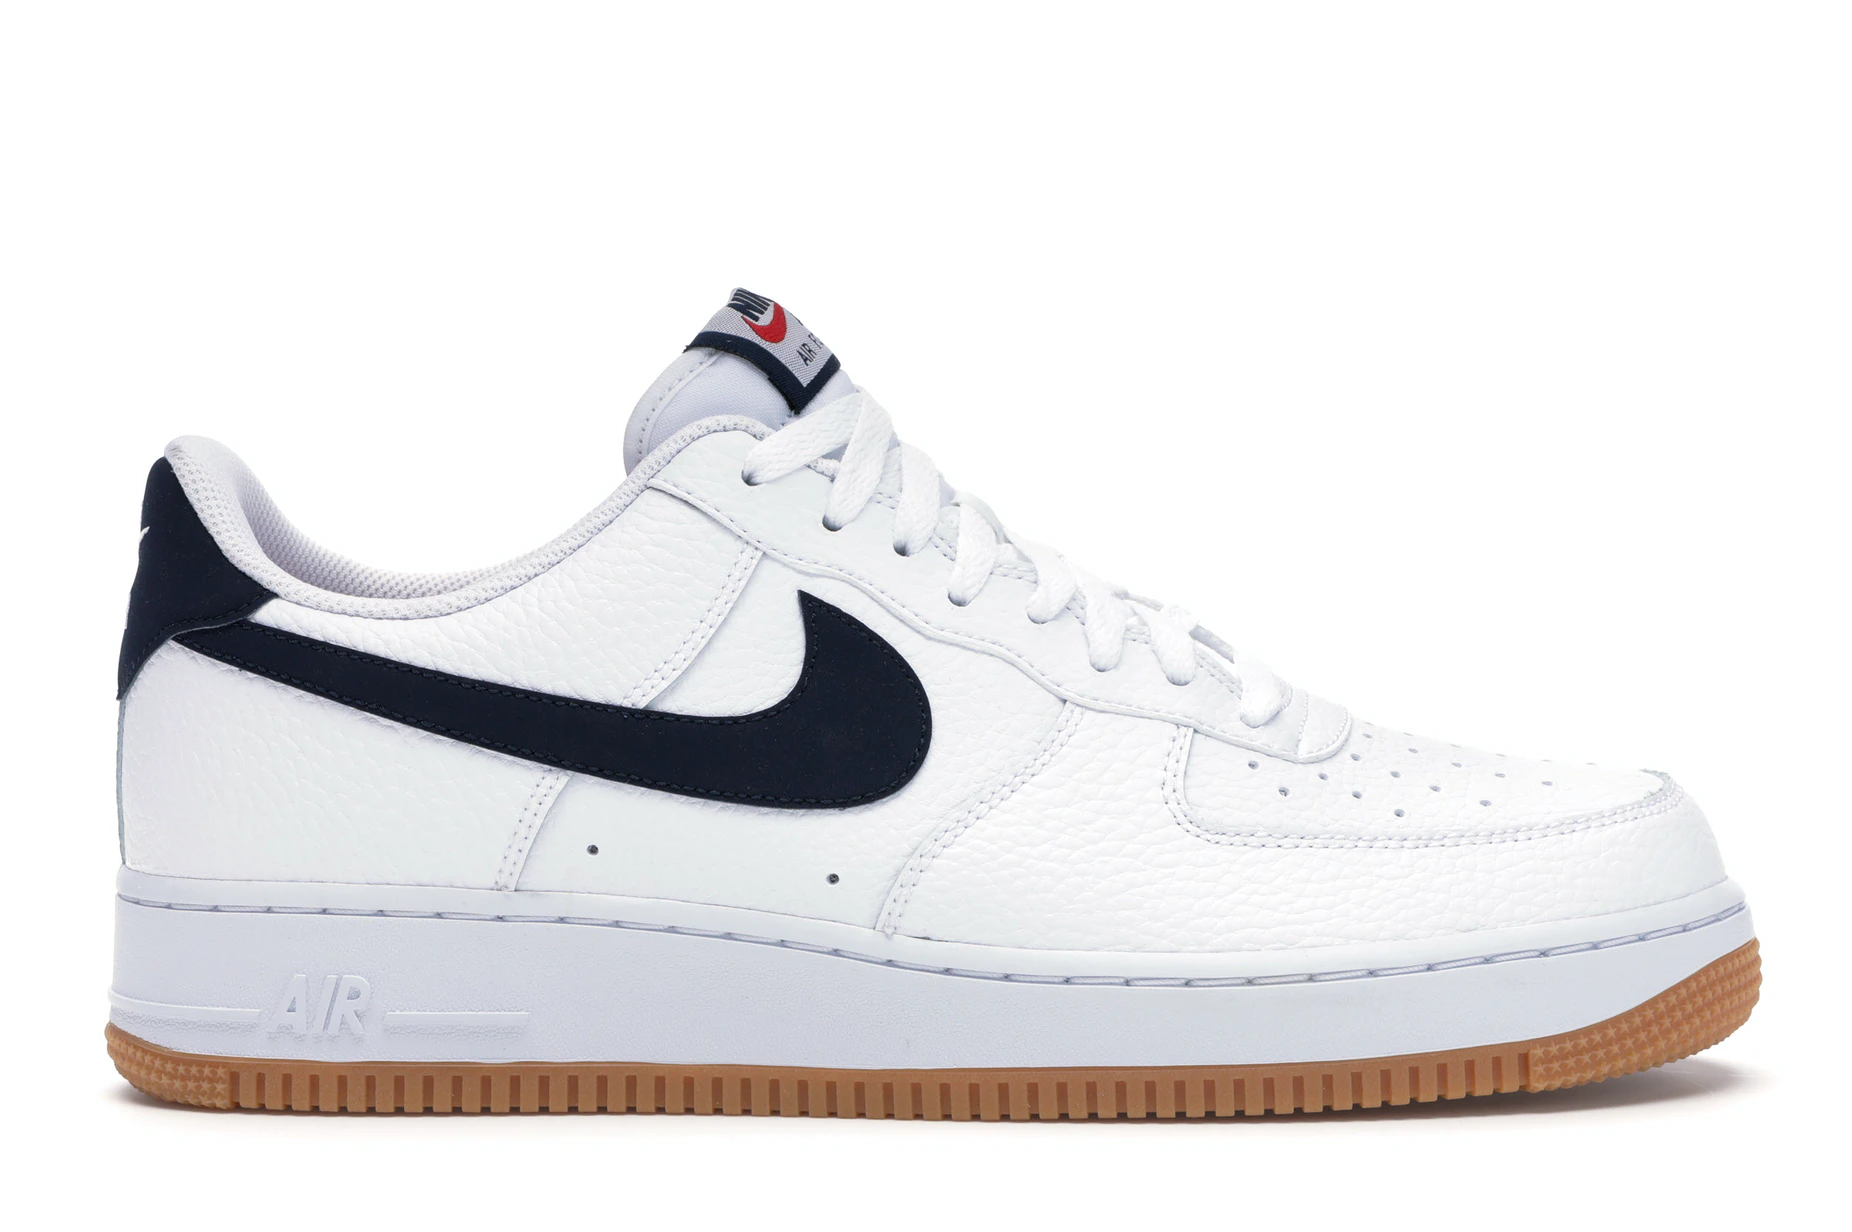 Nike Air Force 1 Low '07 White Obsidian